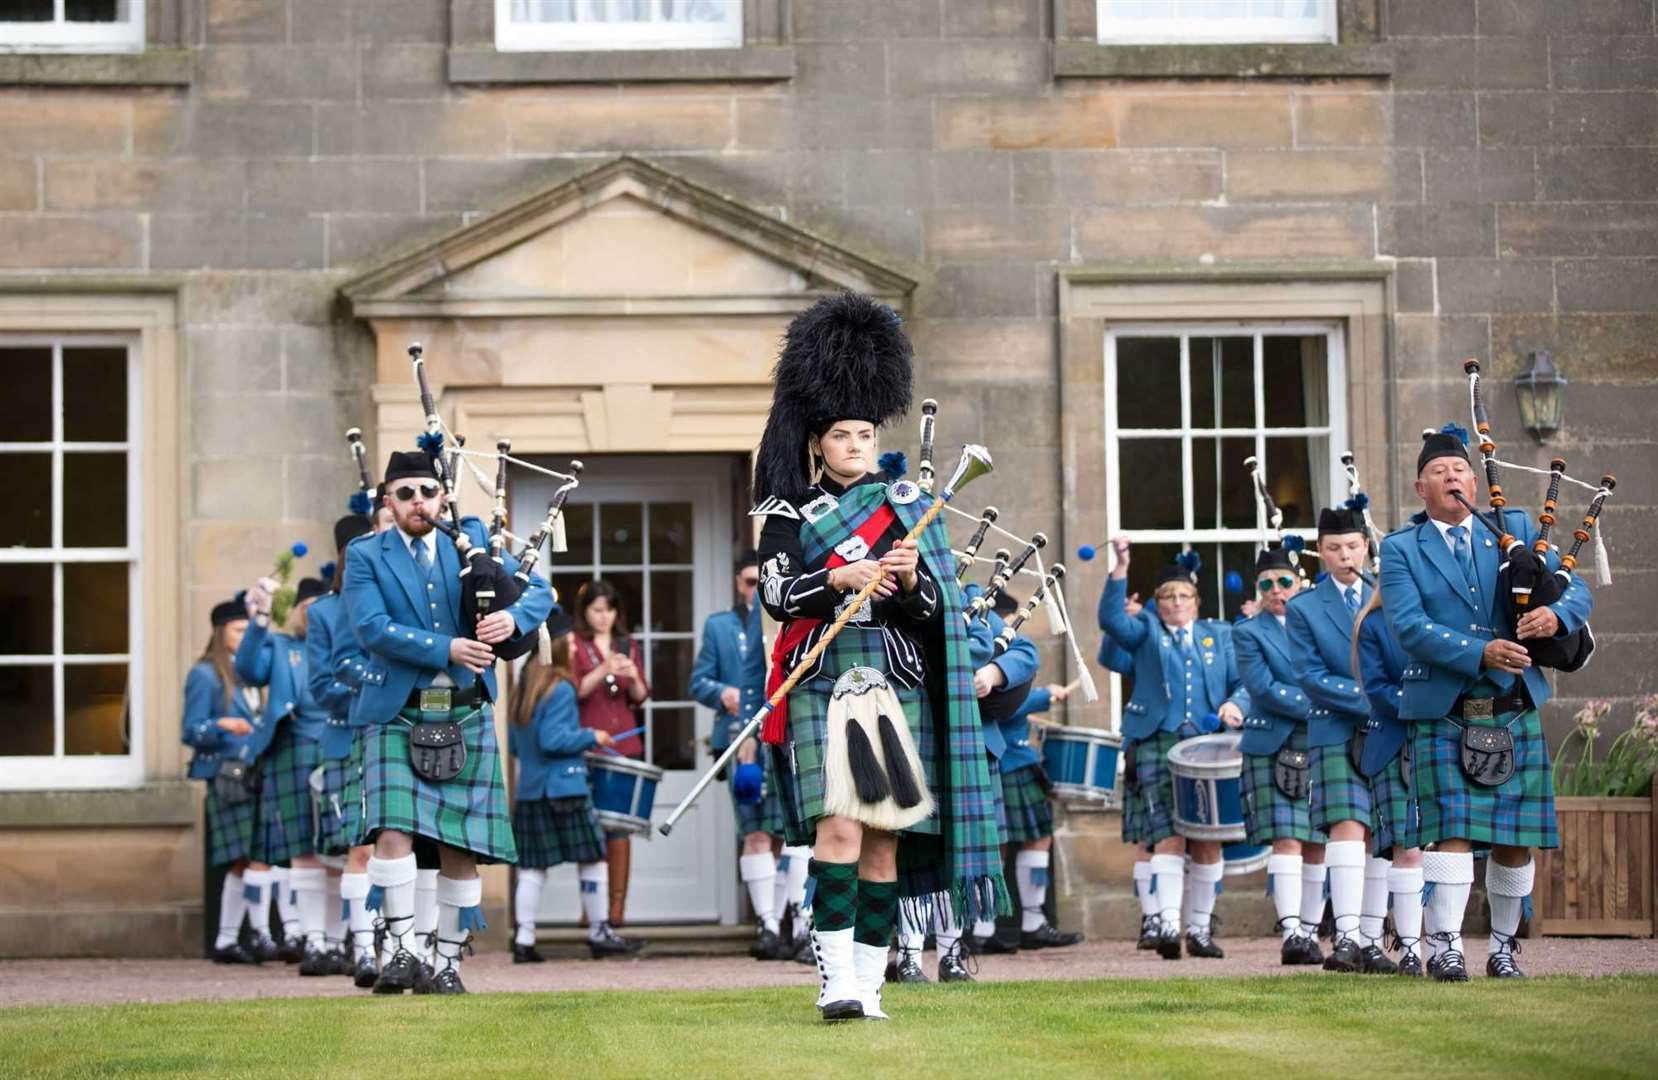 The splendid sound of the pipes and drums will once again sound over the Gordon Castle Highland Games.